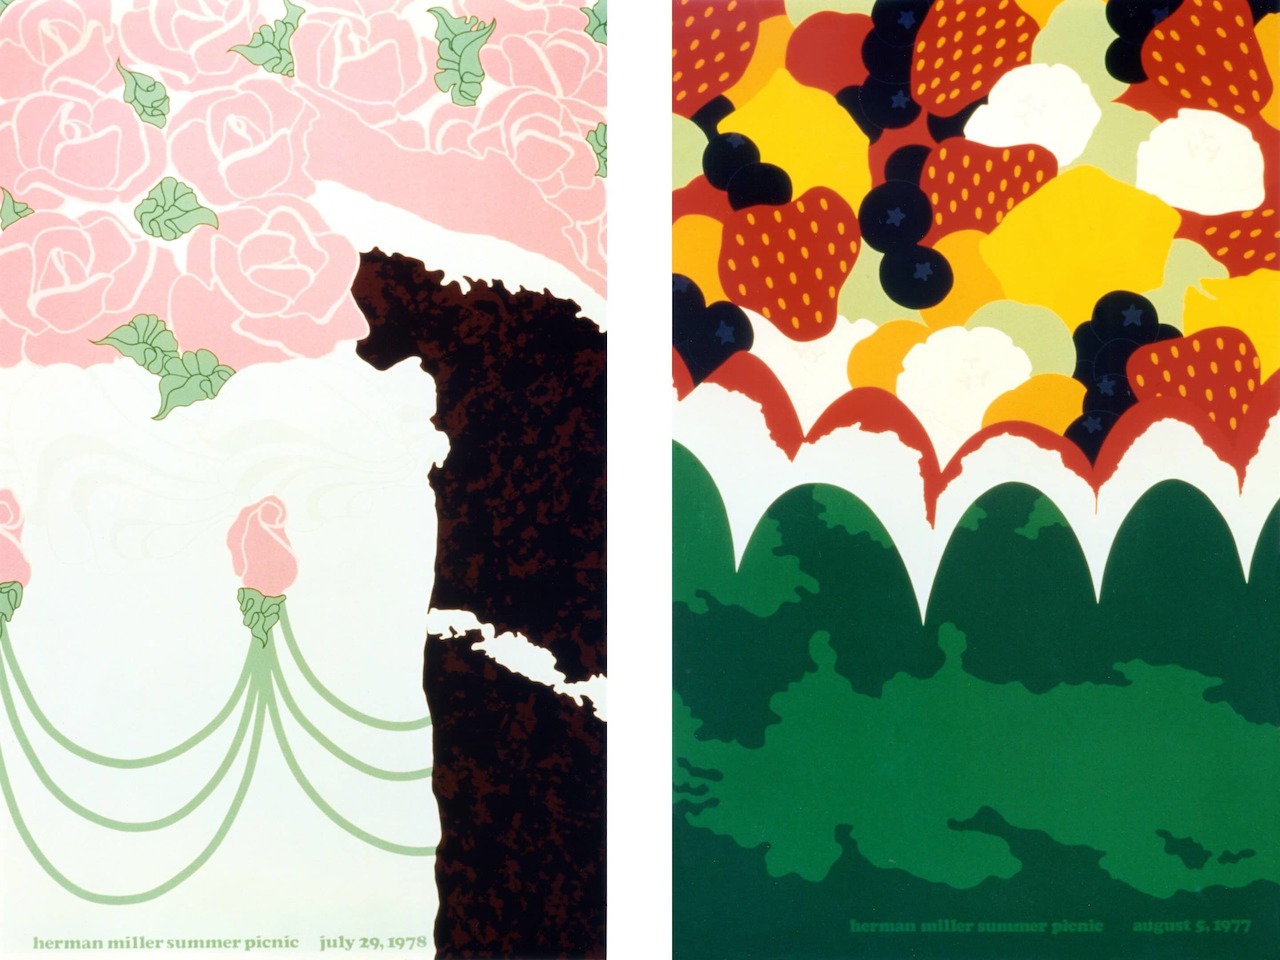 The 1977 and 1978 posters for Herman Miller's summer picnic, by Steve Frykholm, as reproduced in Herman Miller: A Way of Living